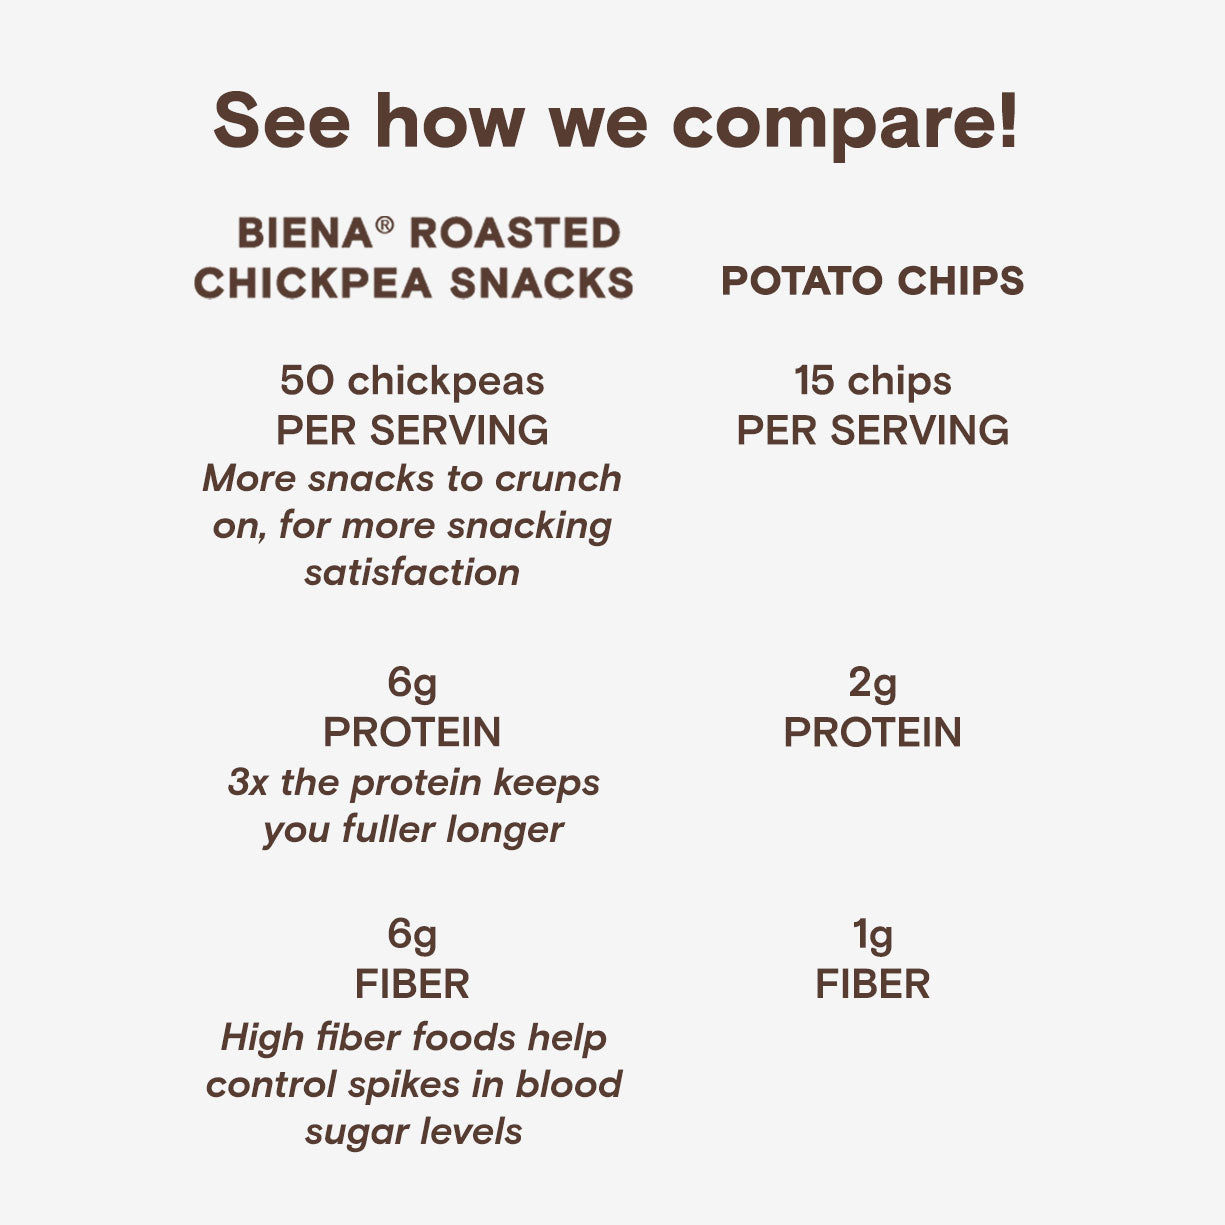 See how Biena Roasted Chickpea Snacks compare to Potato Chips